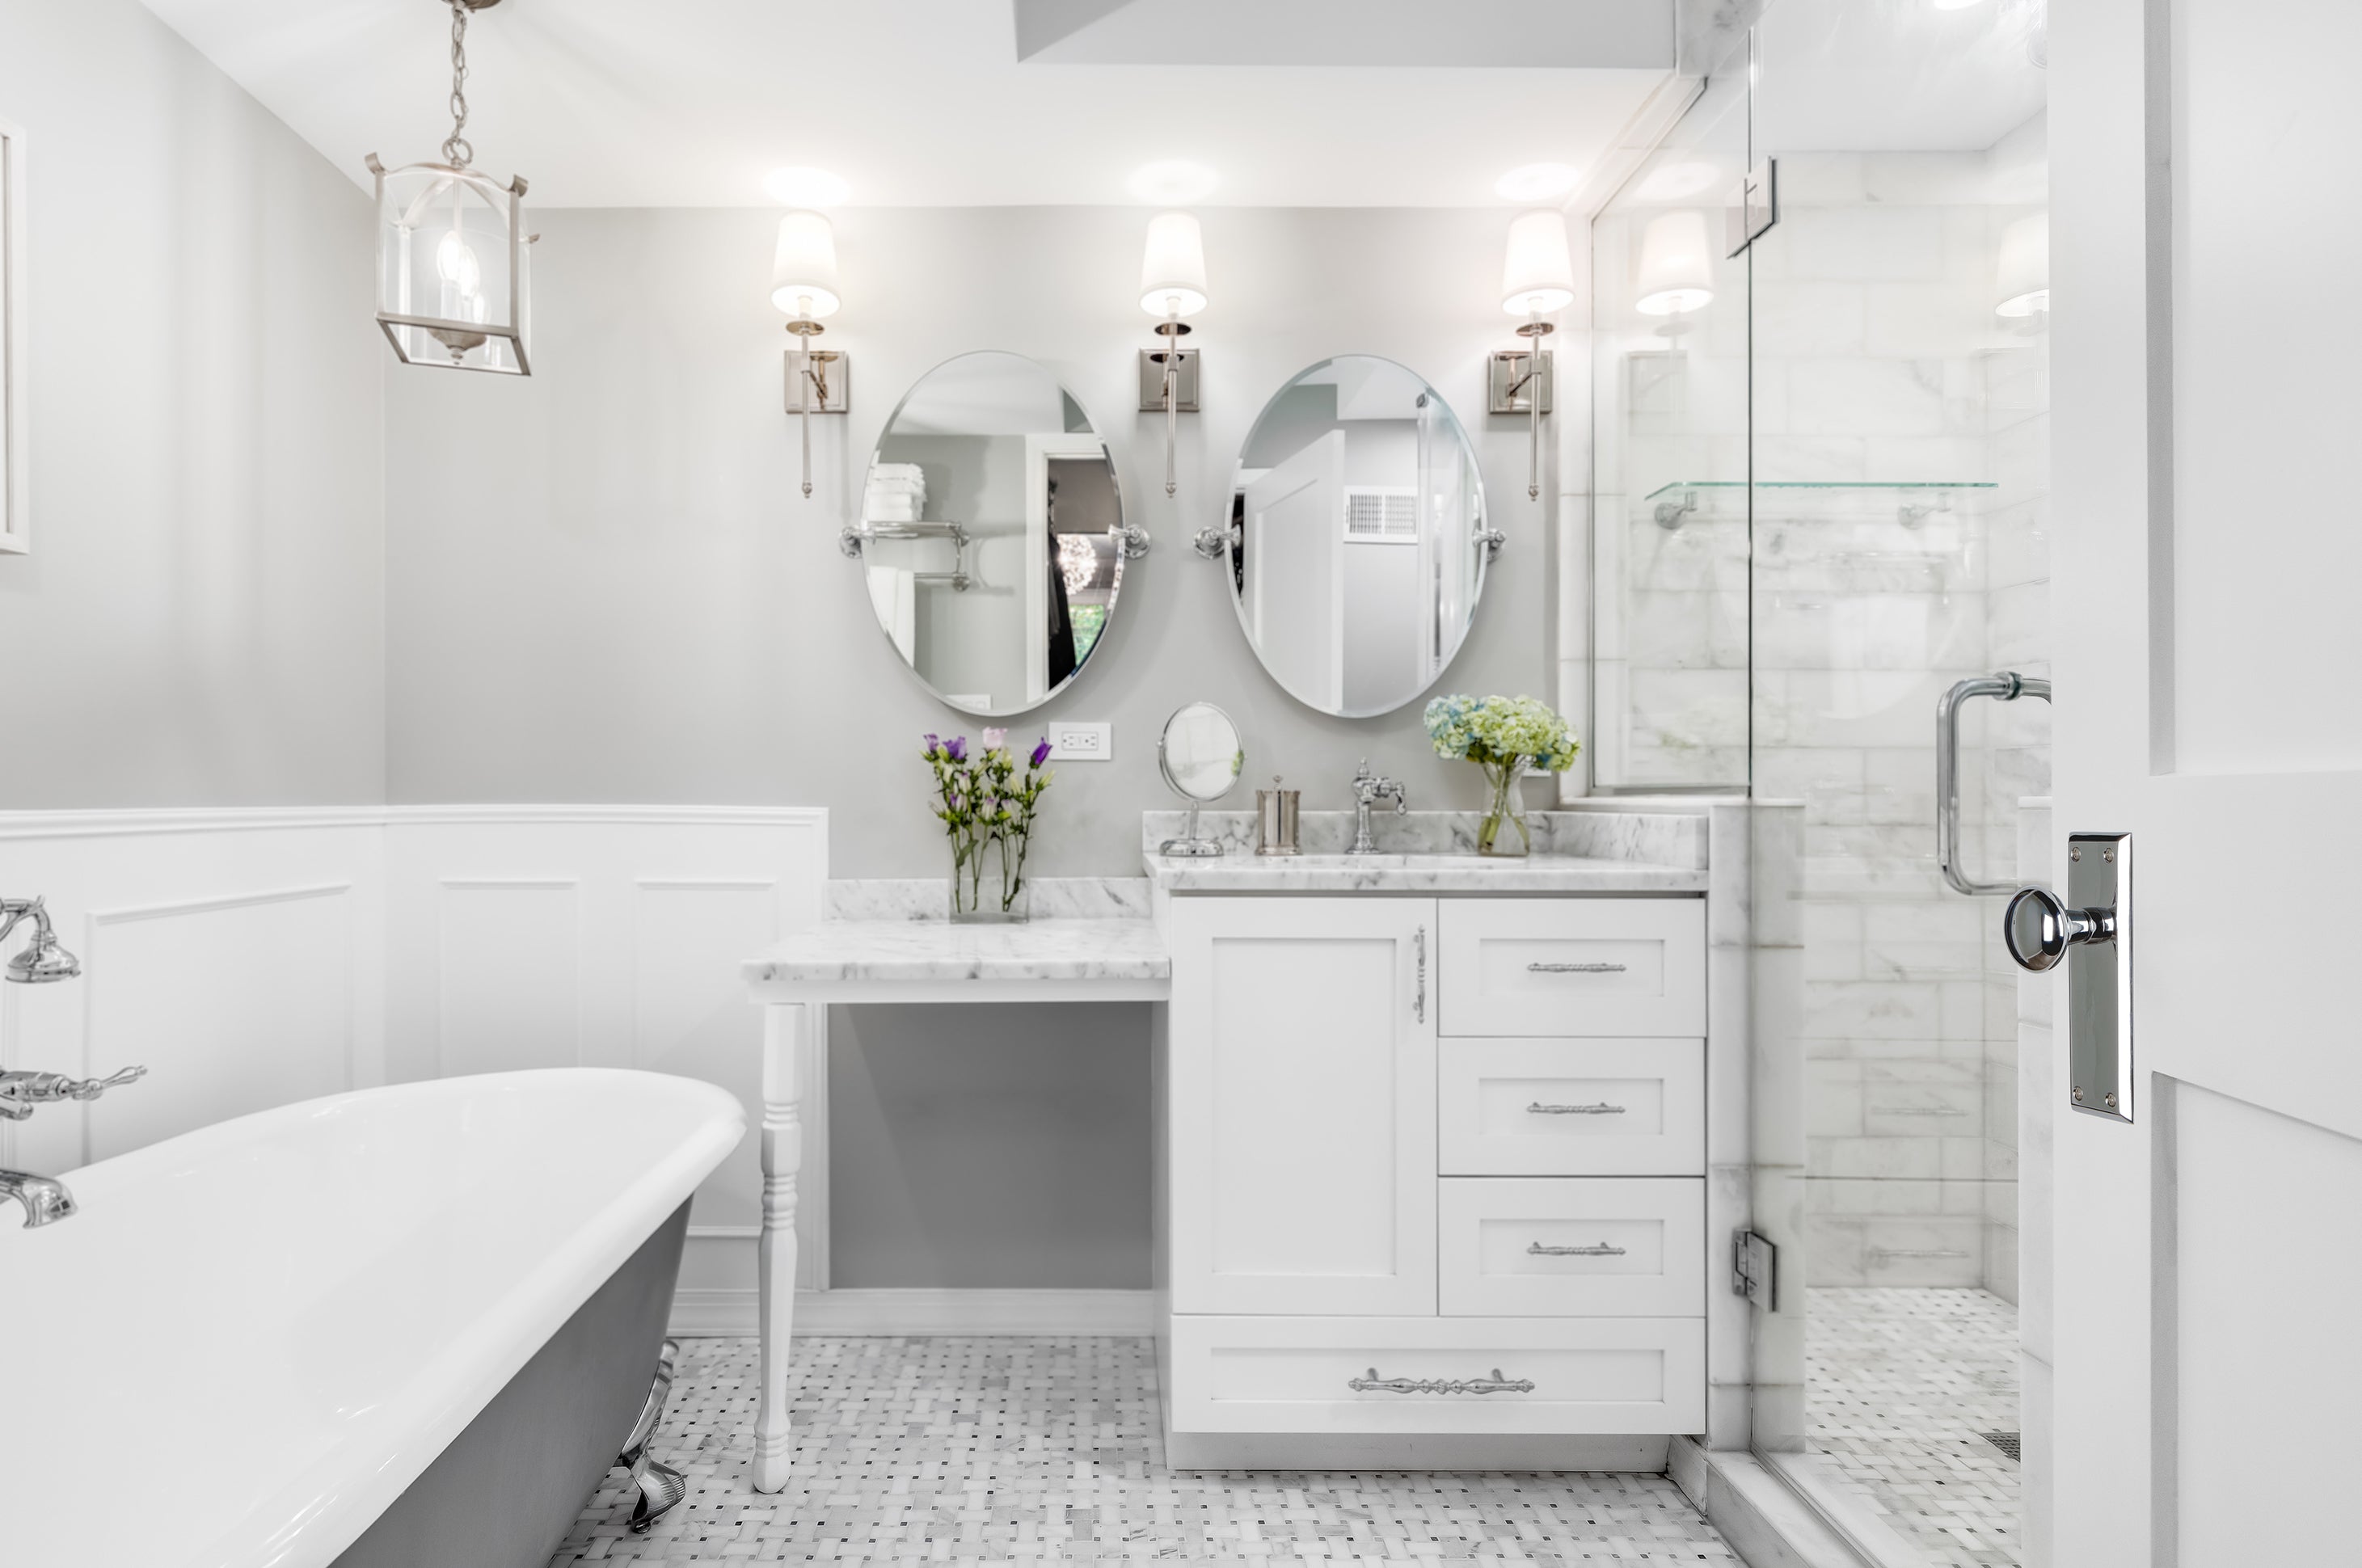 Crisp white bathroom with bright chrome hardware. A Grandeur Fifth Avenue Long Plate with Fifth Avenue Knob in in Bright Chrome.